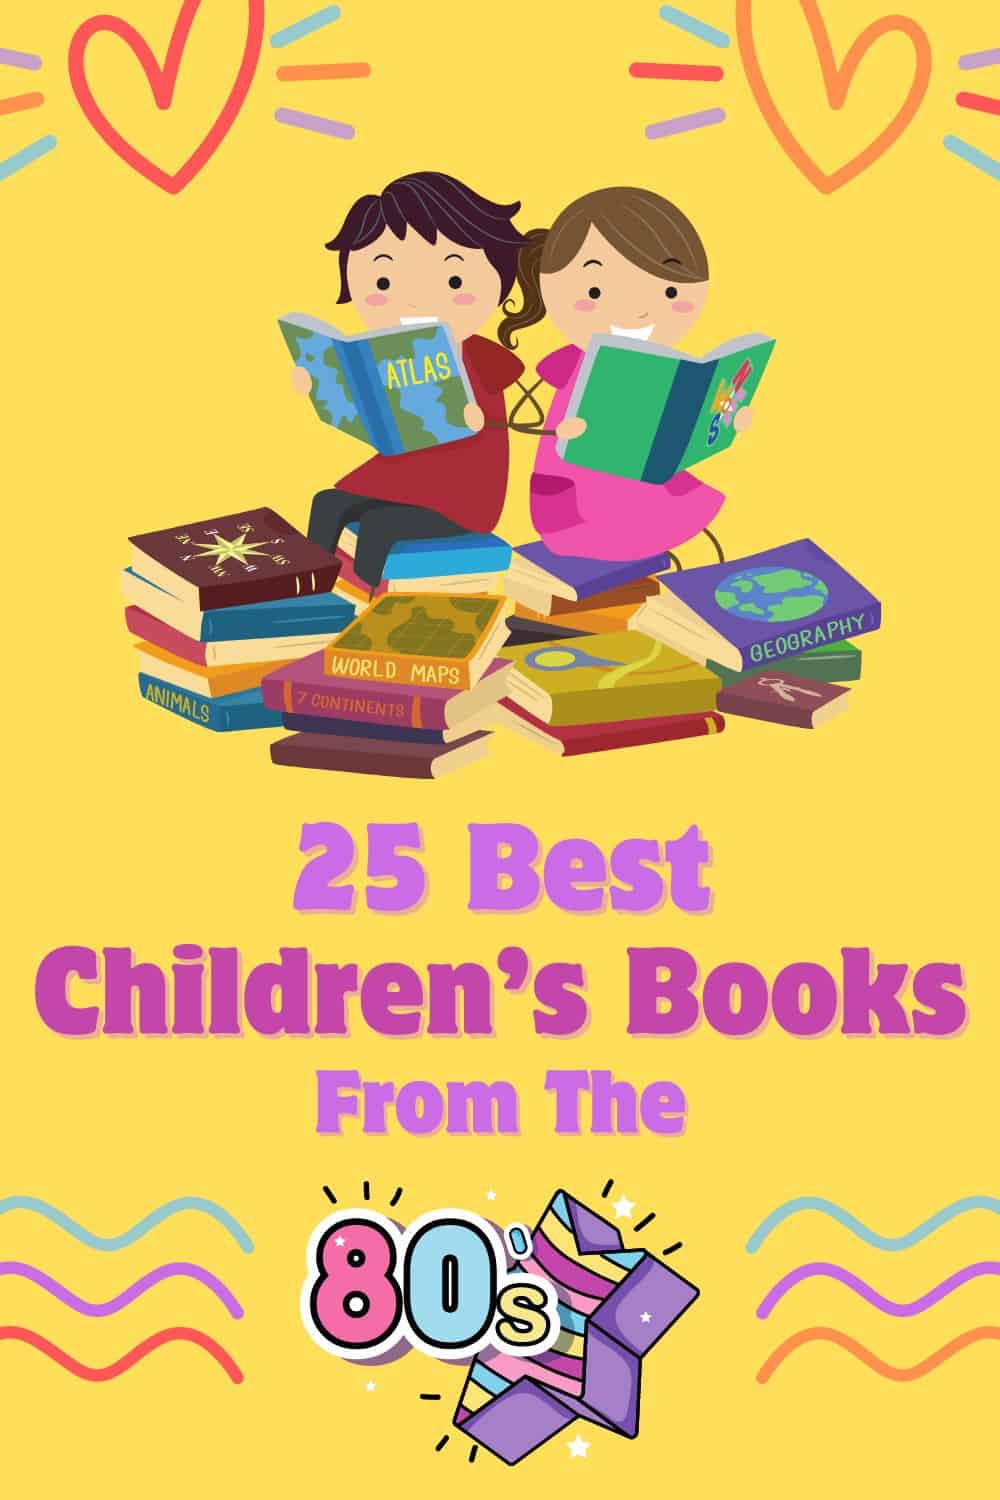 List of popular kids books from the 80s